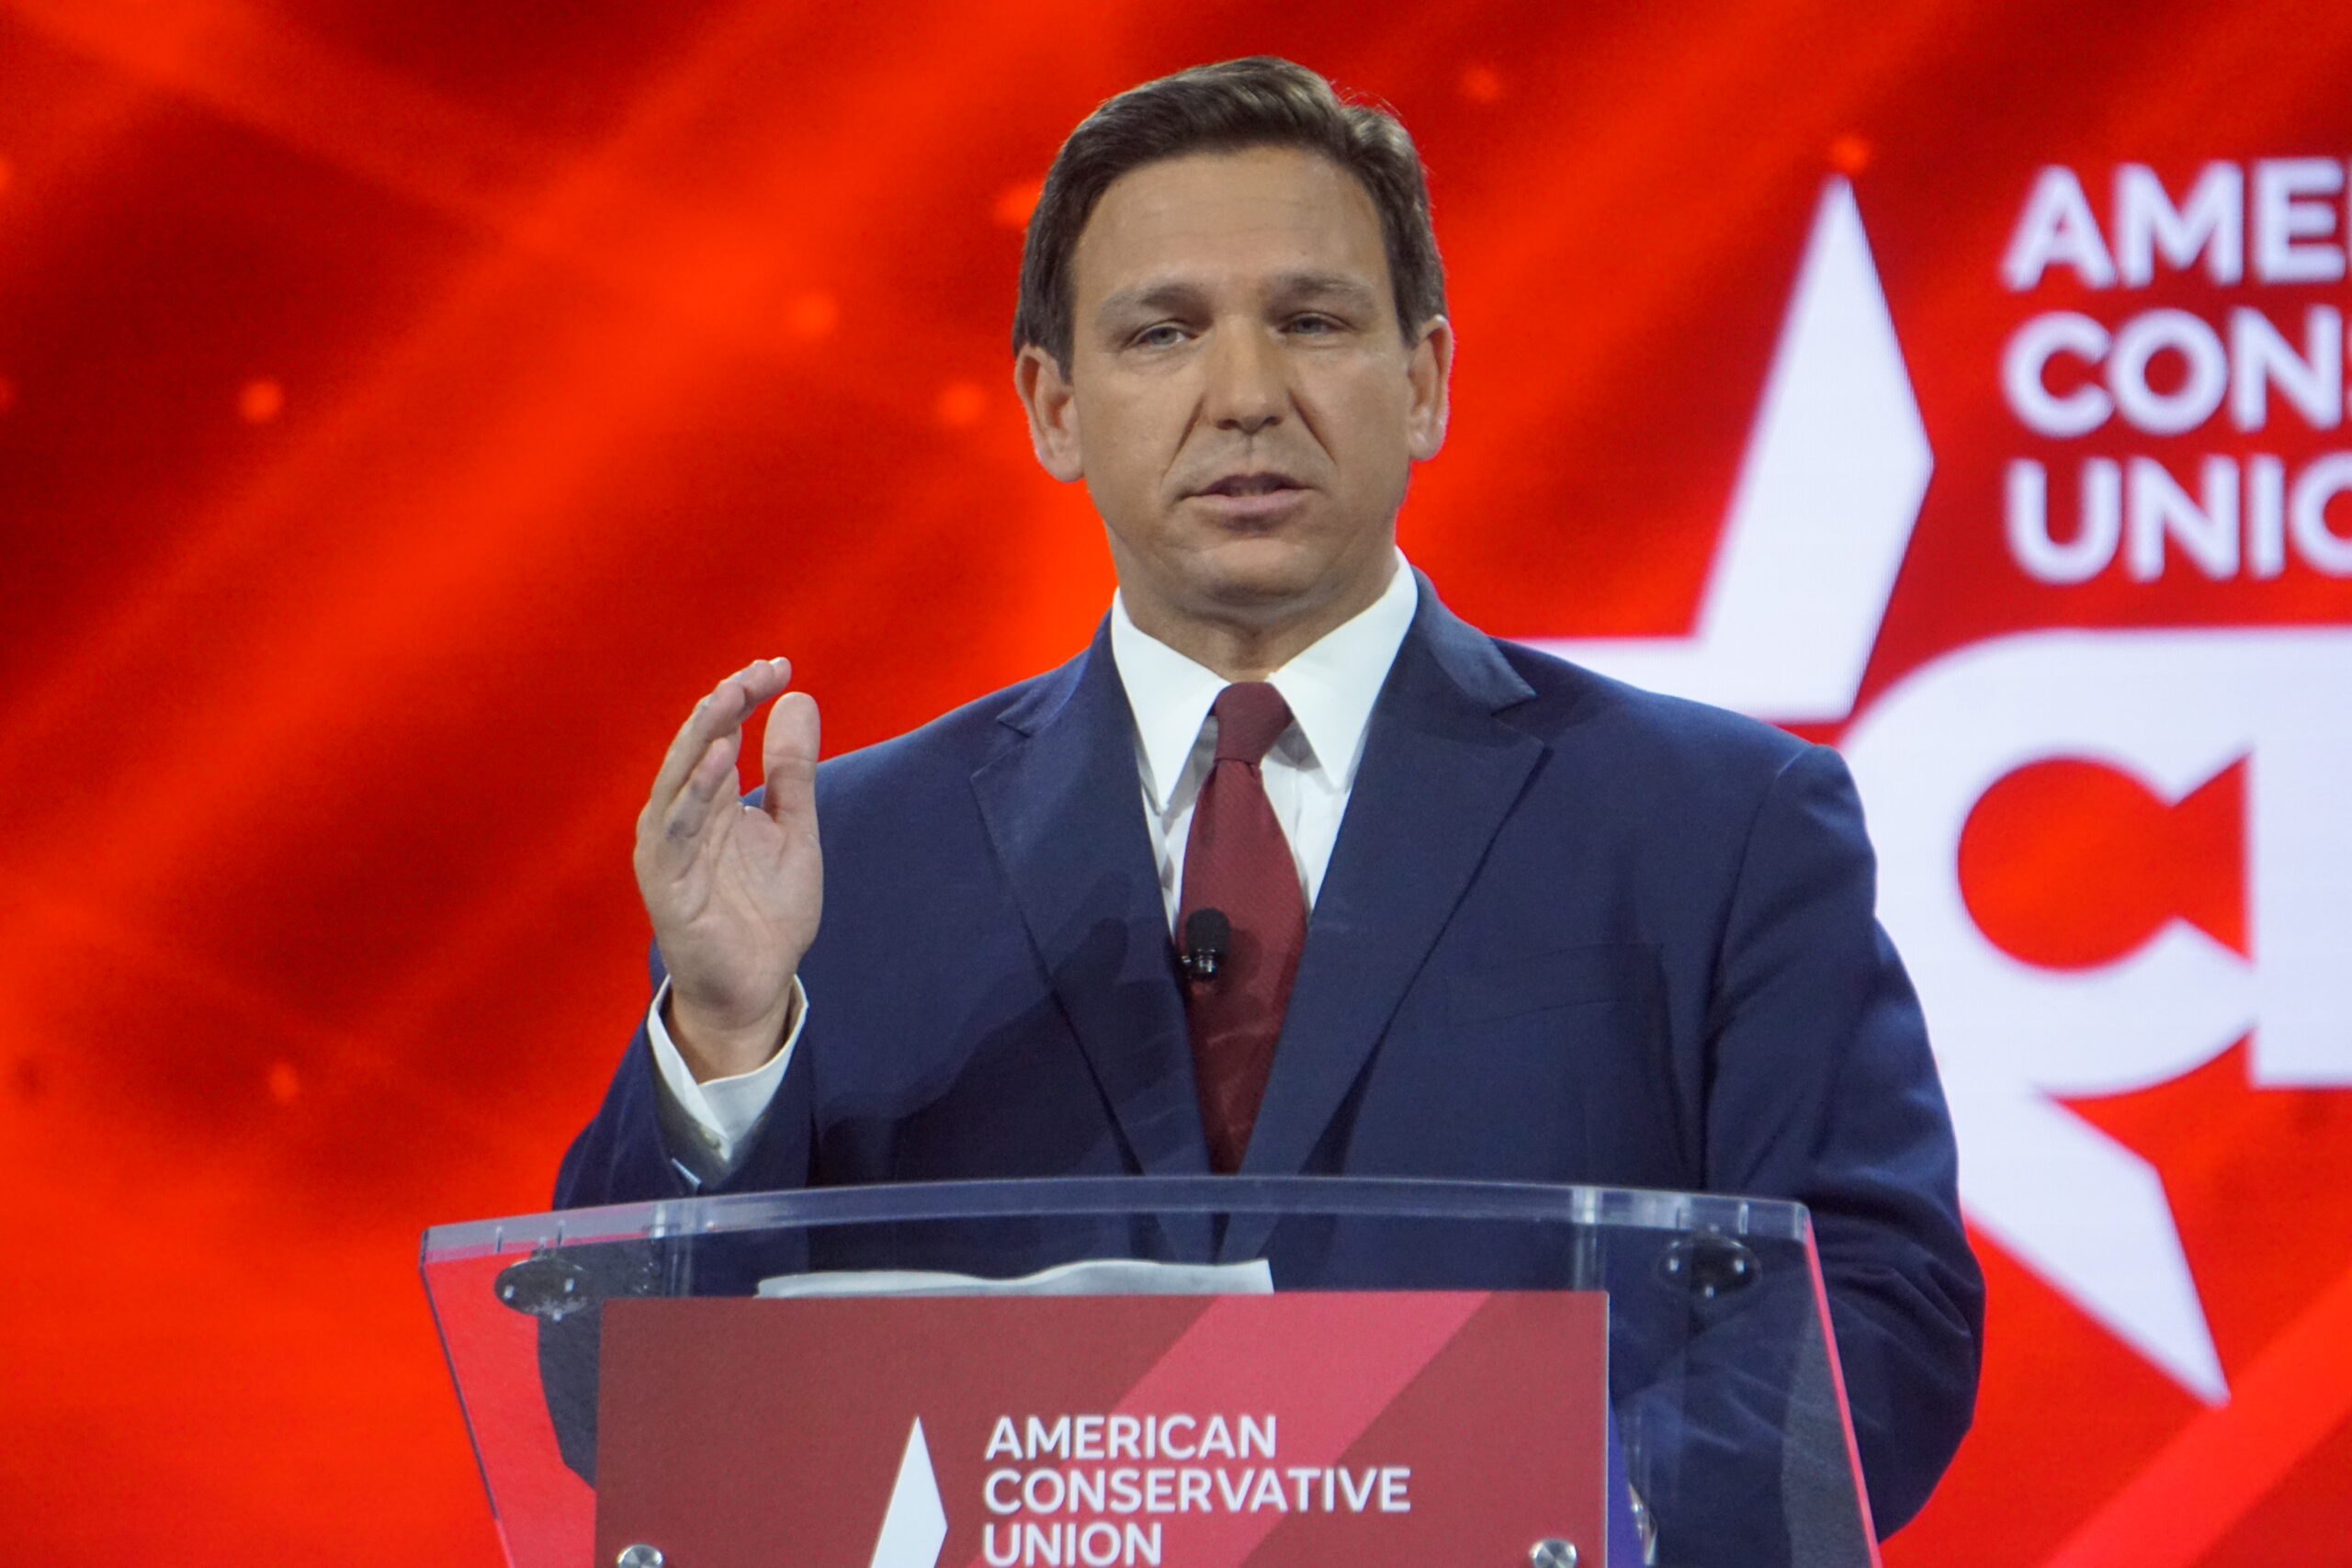 TIME Magazine Names DeSantis in Top 100 Most Influential People